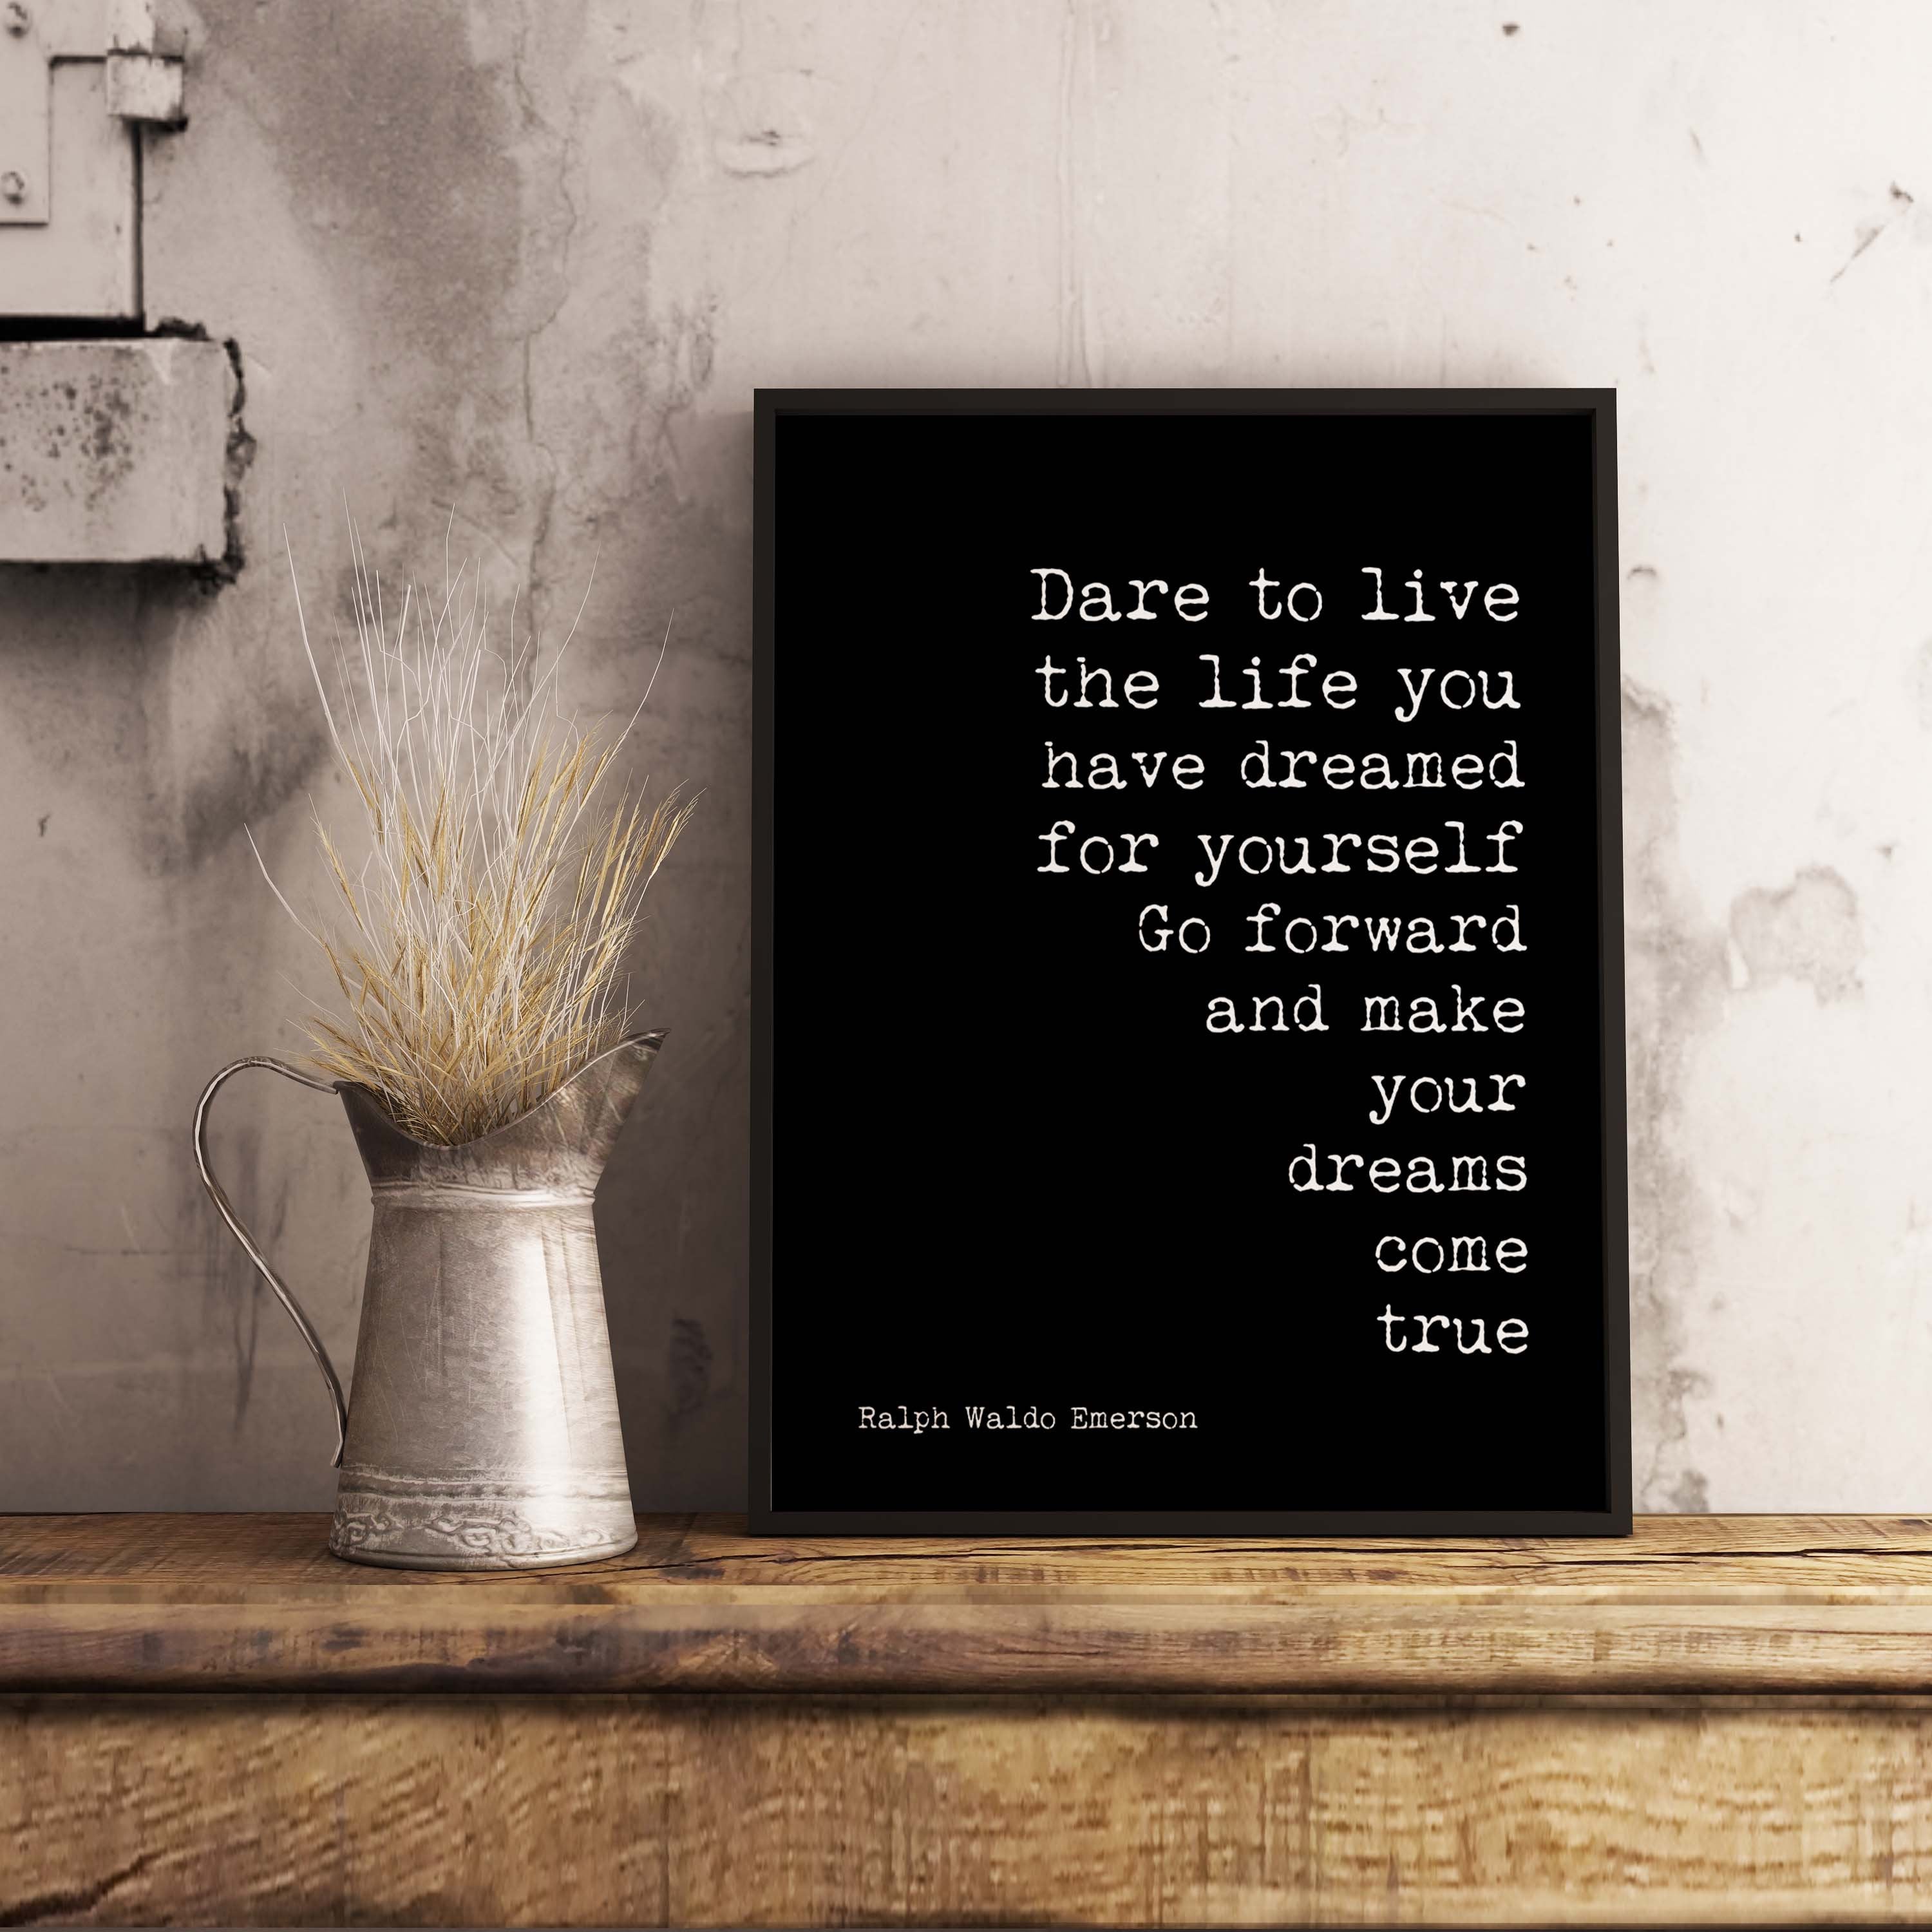 Framed Ralph Waldo Emerson Print Dare to Live the Life You Have Dreamed - BookQuoteDecor